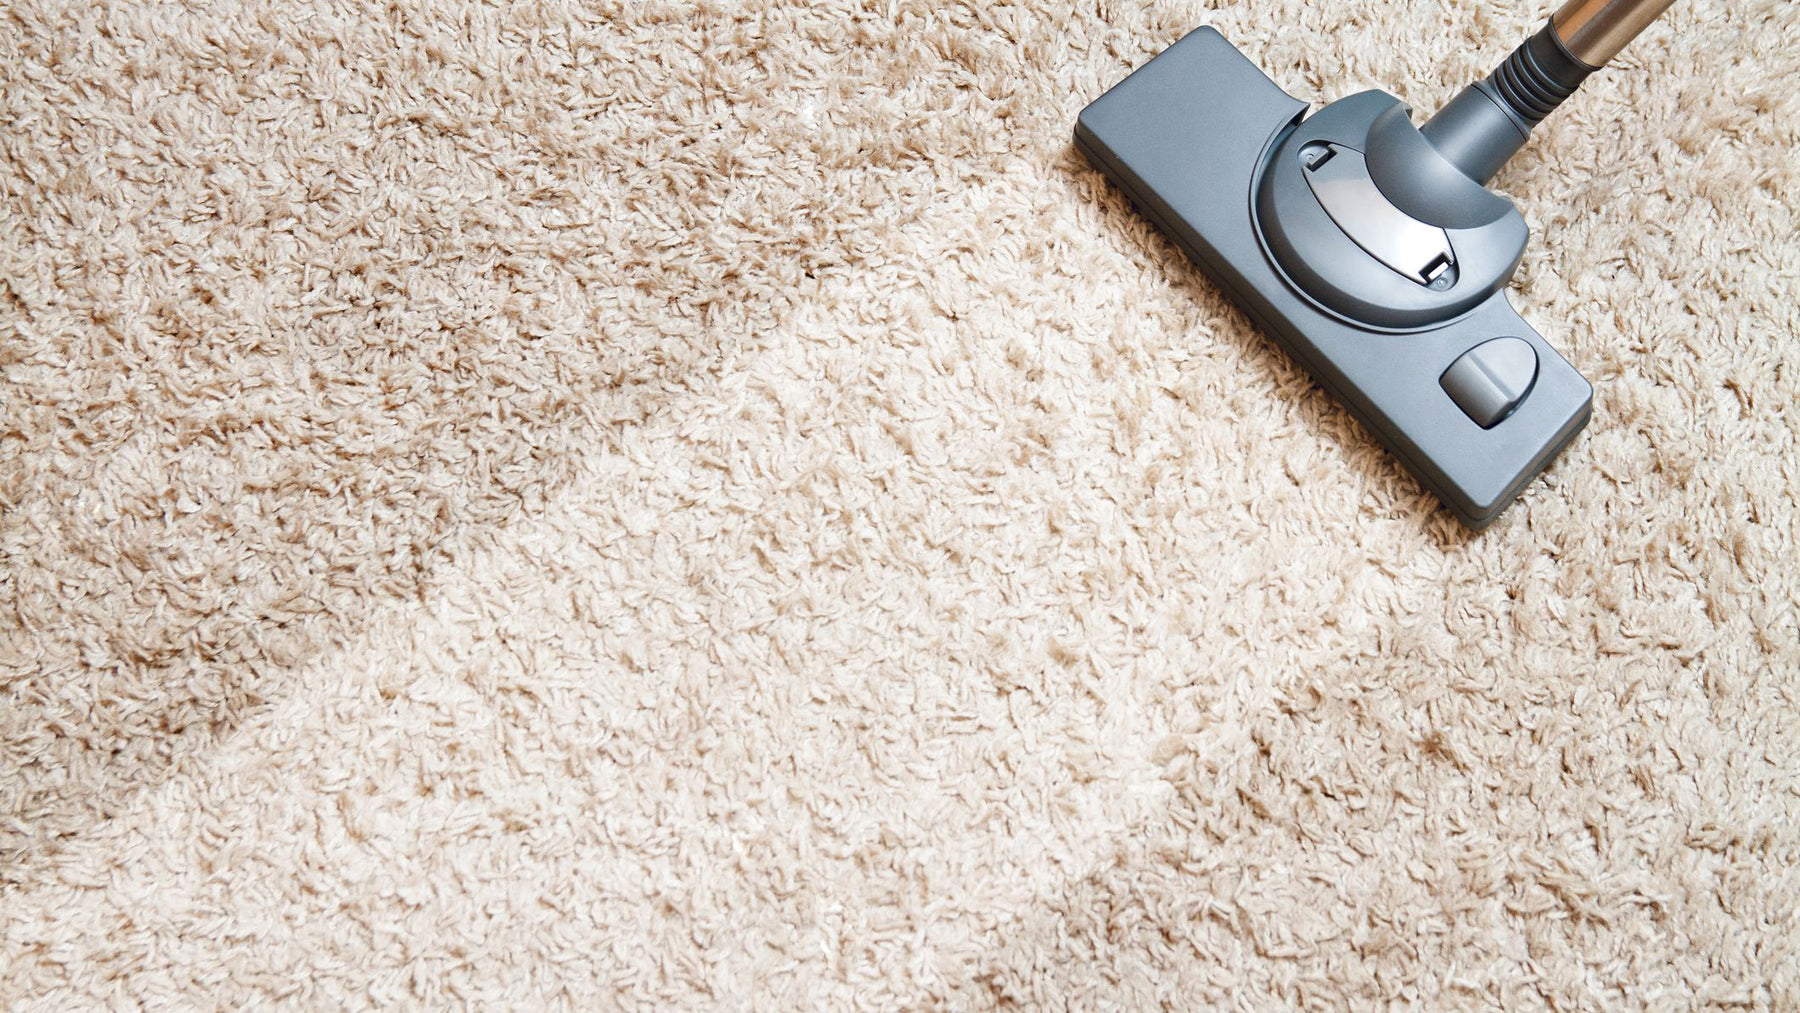 The Best Flooring Types for Allergy Sufferers